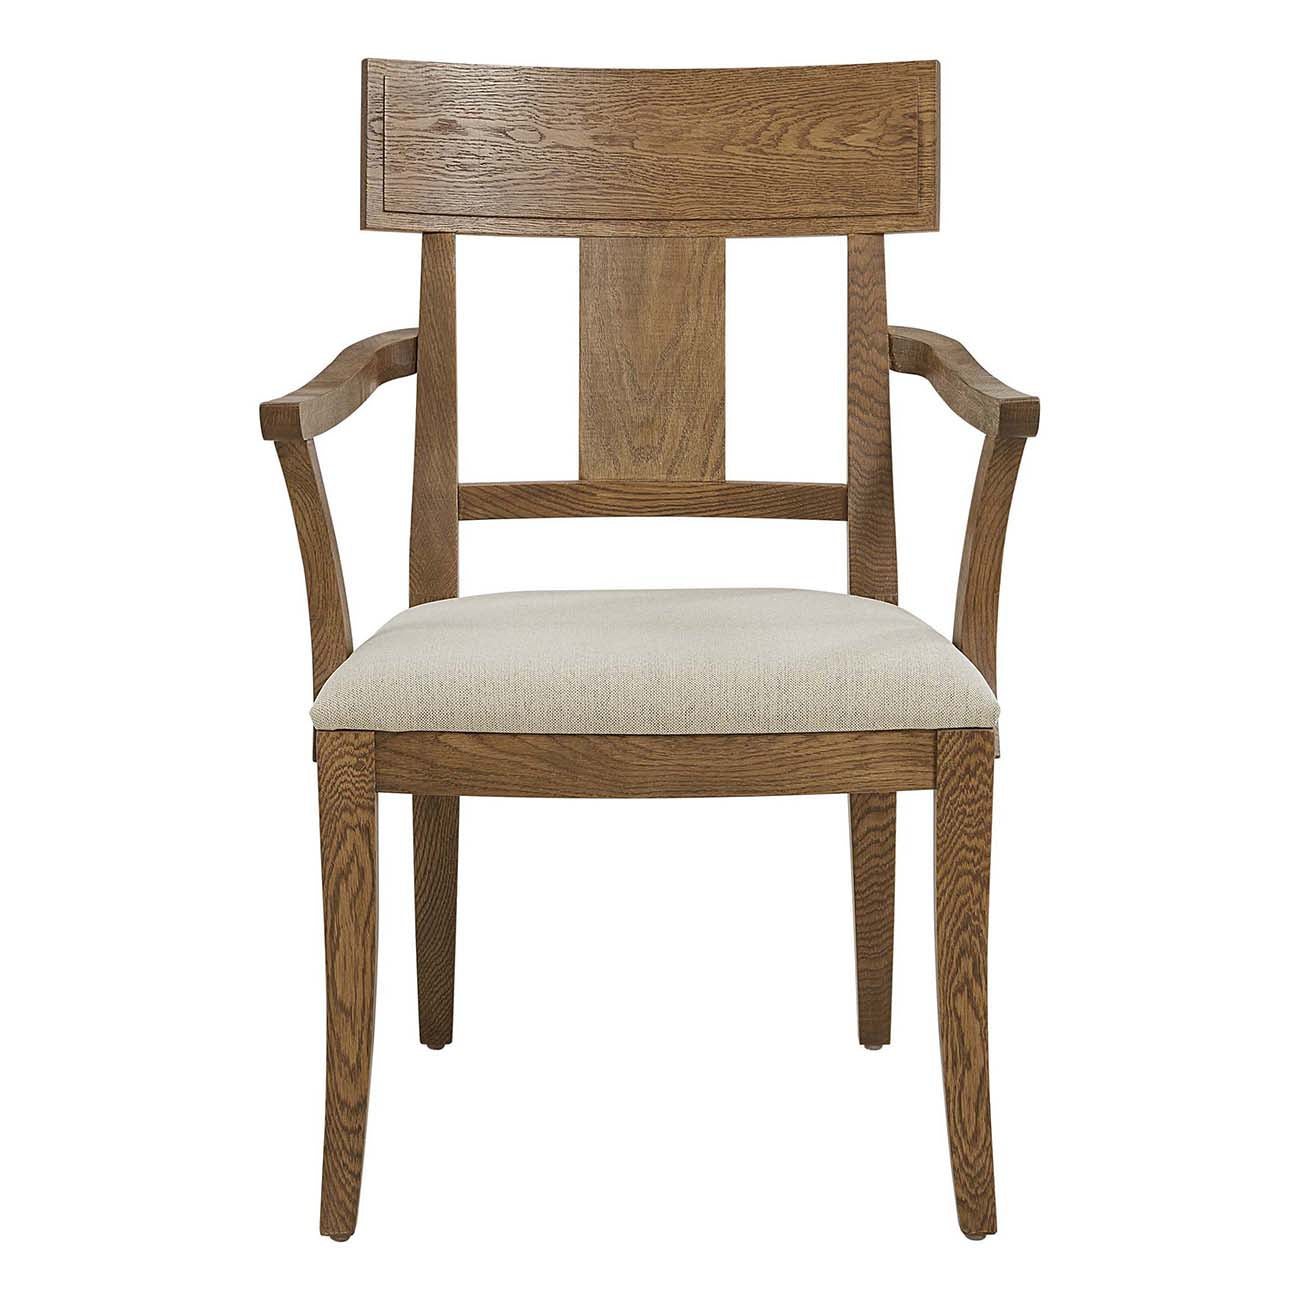 St. Lawrence Curved Arm Chair - Stickley Brand